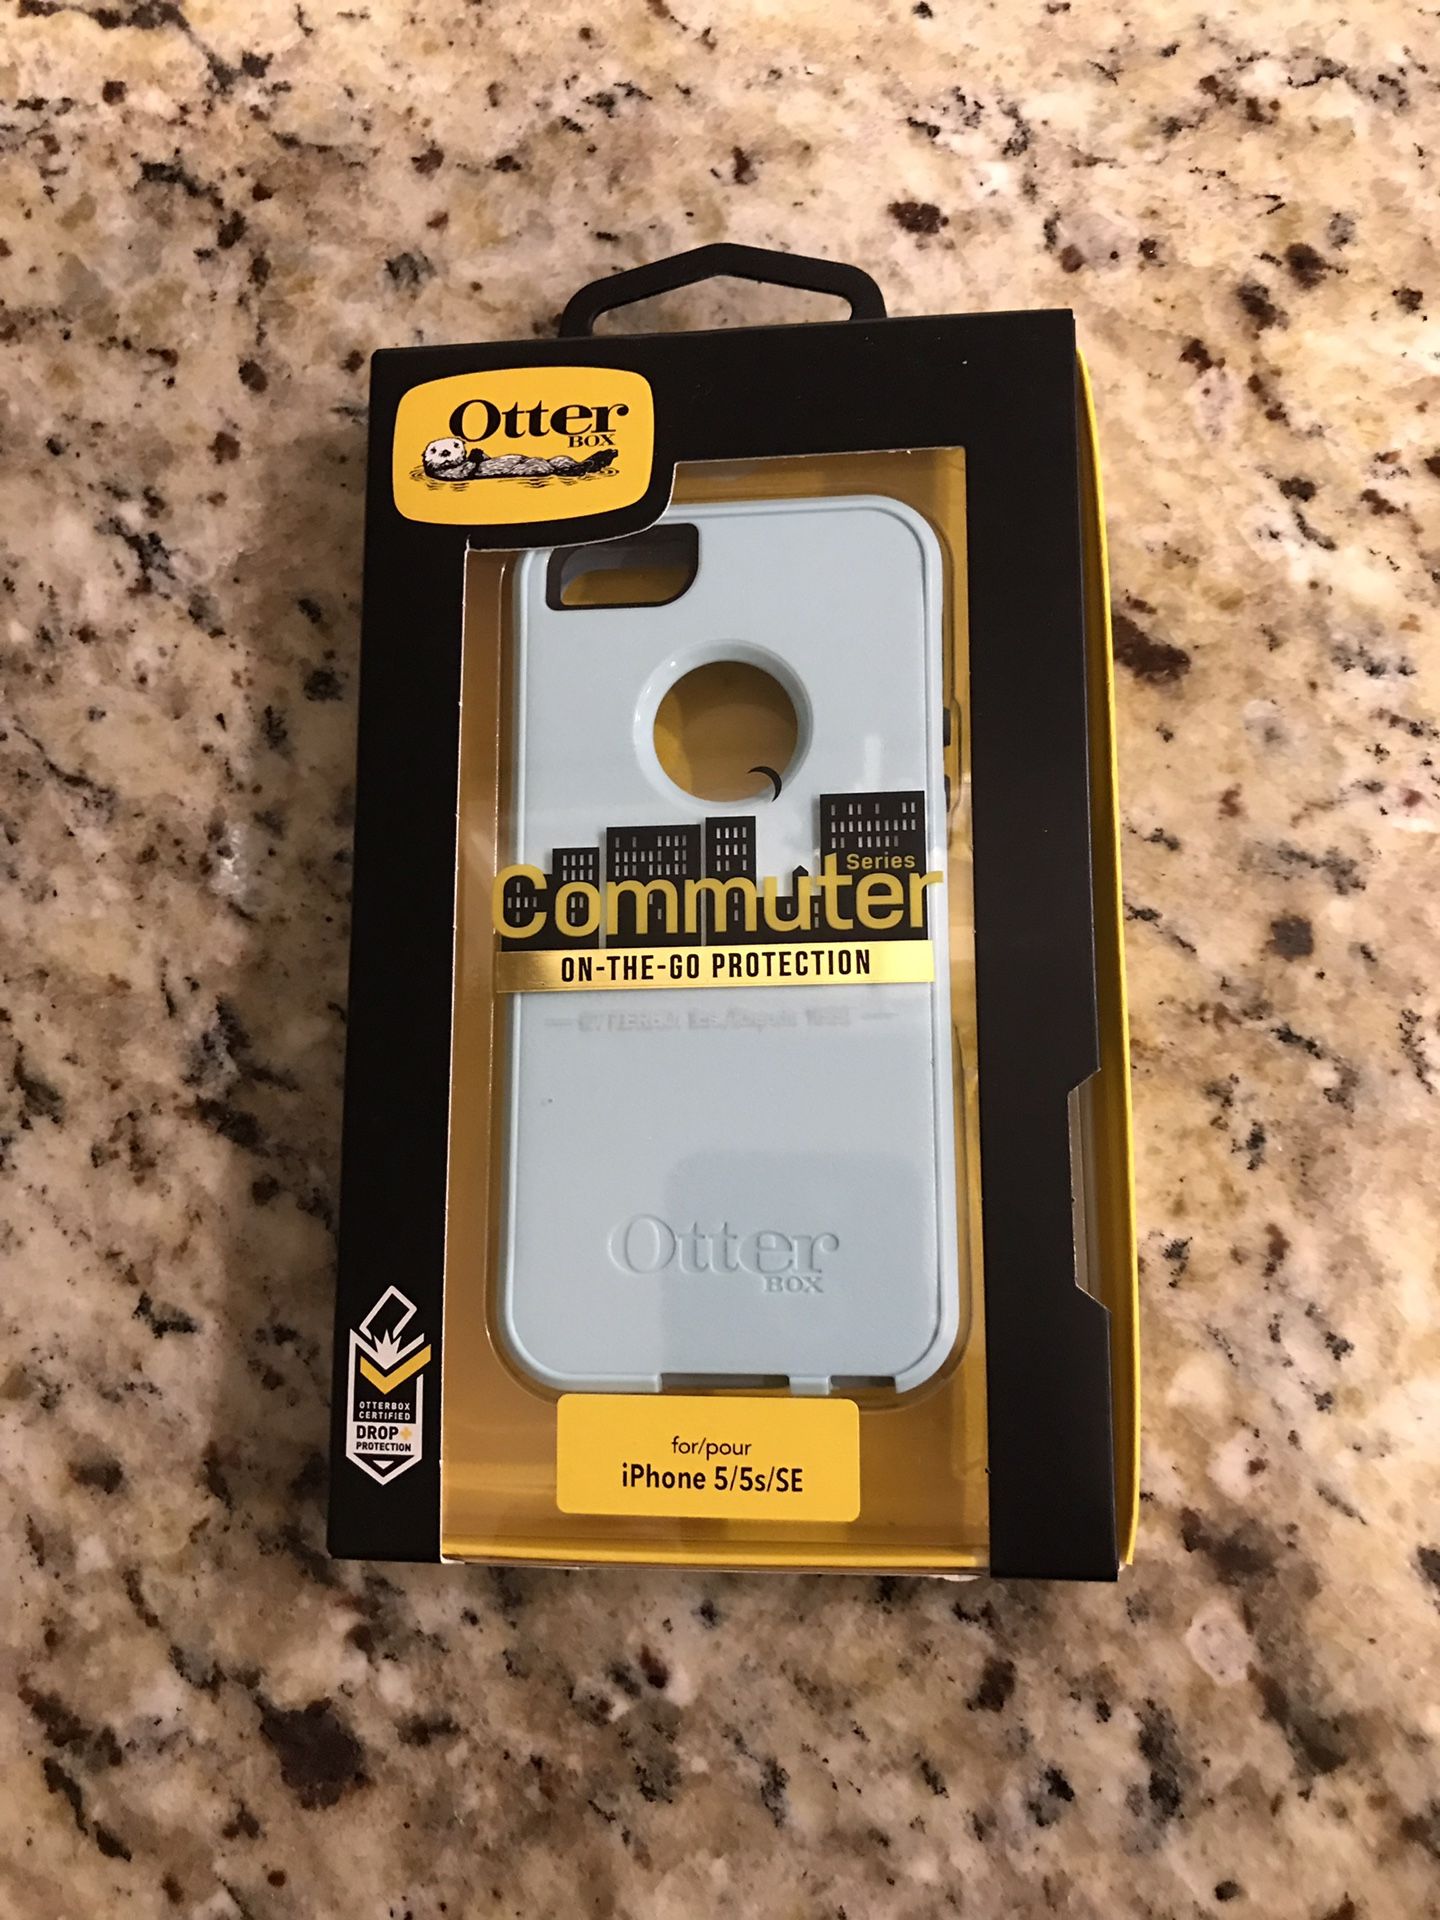 New Otter box for IPhone 5 5s SE